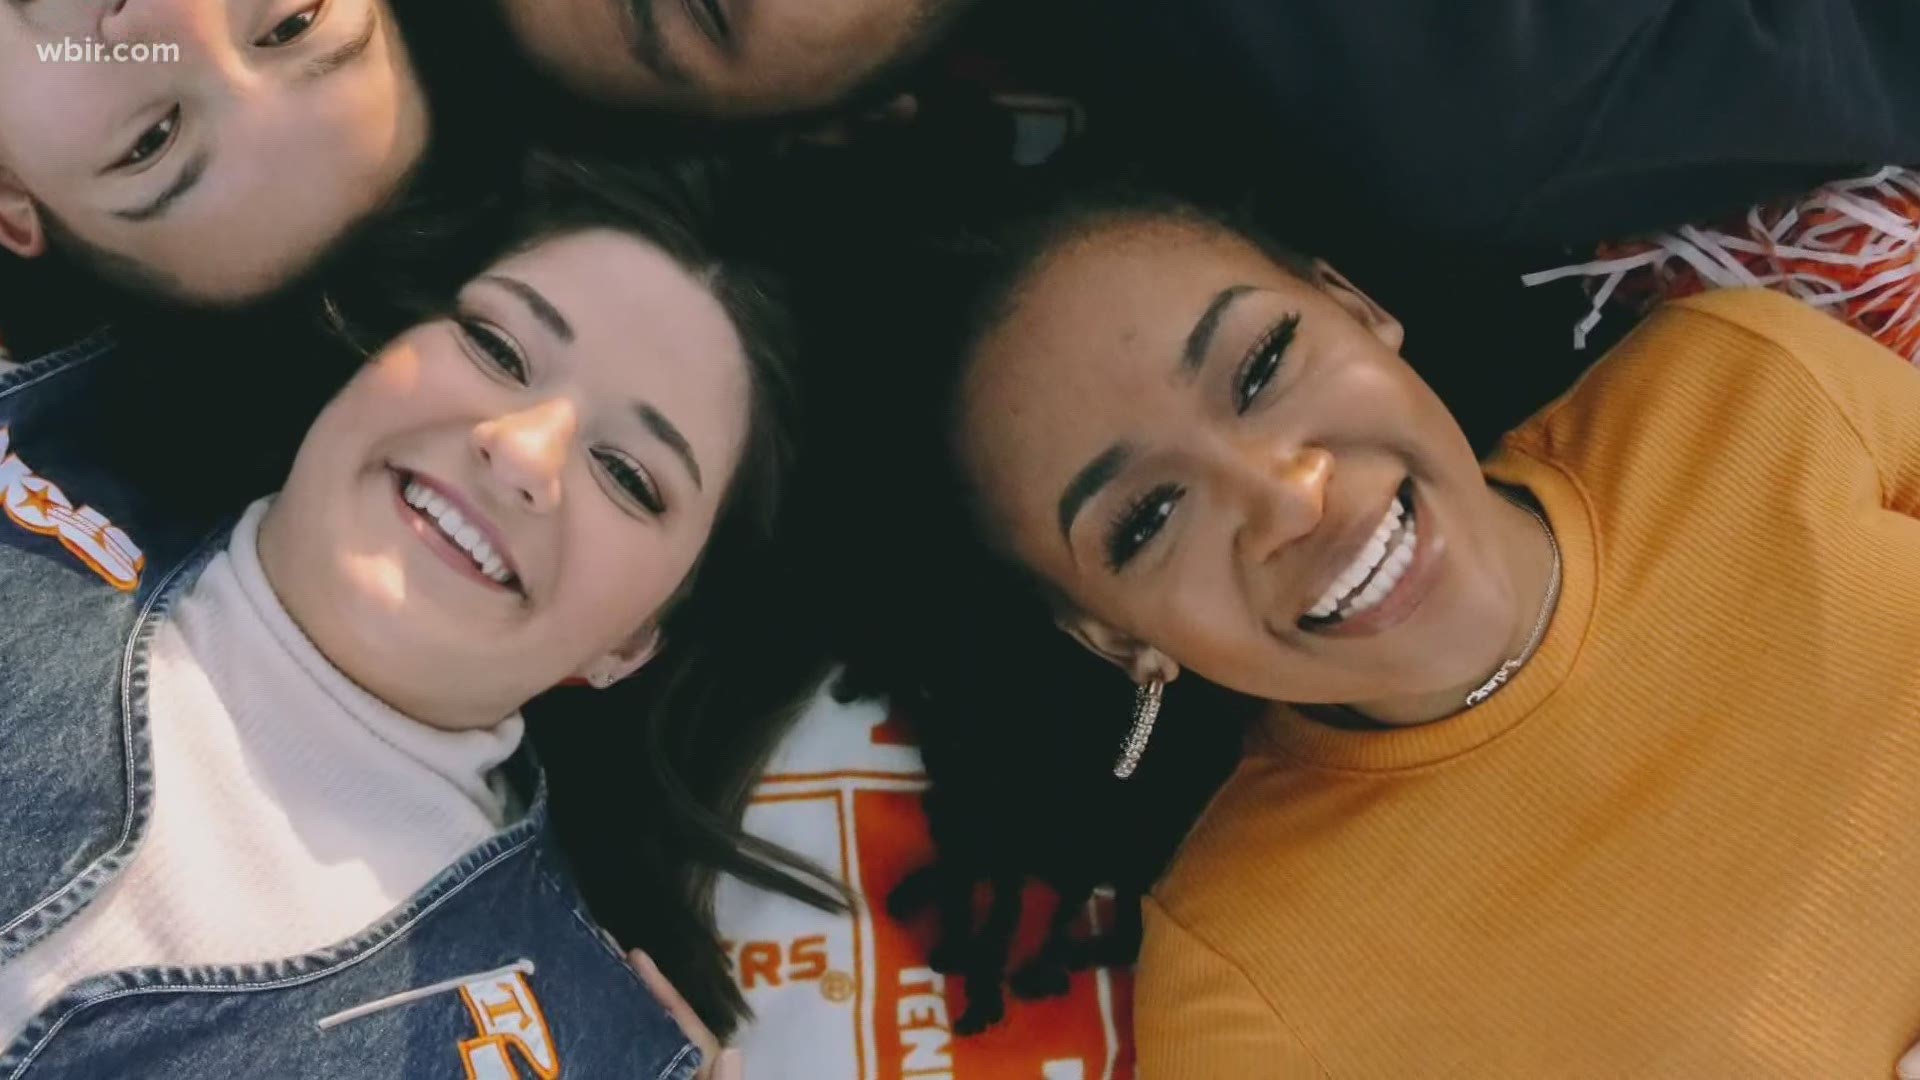 UT's new SGA president is making history. She's the first black woman to hold the office.